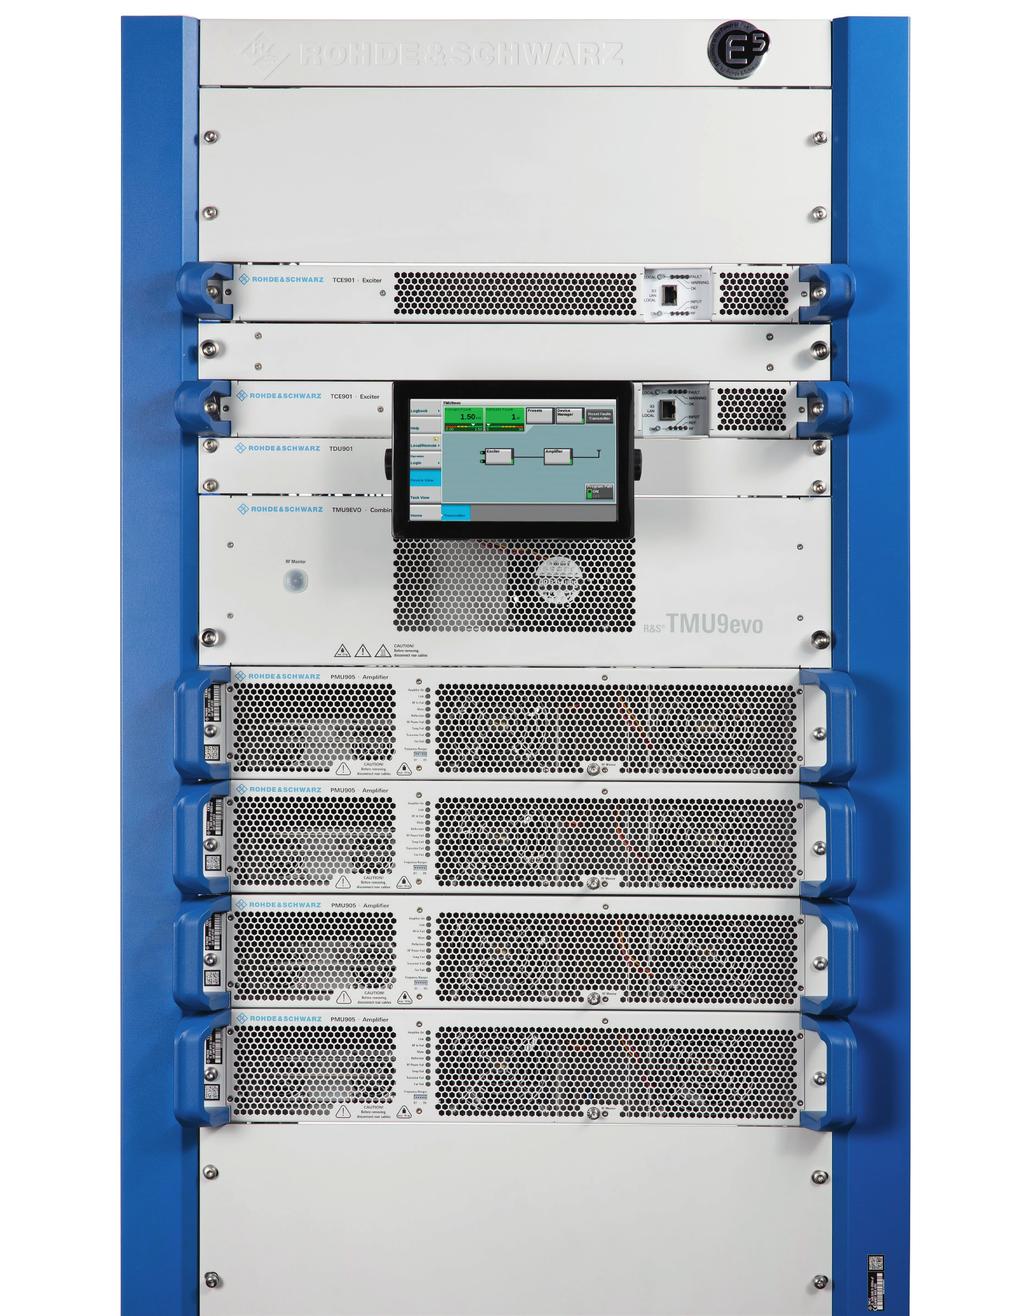 Network operators benefit highly from low operating costs throughout the product s lifecycle. The air-cooled R&S TMU9evo UHF medium-power transmitter has output power levels from 400 W to 3.